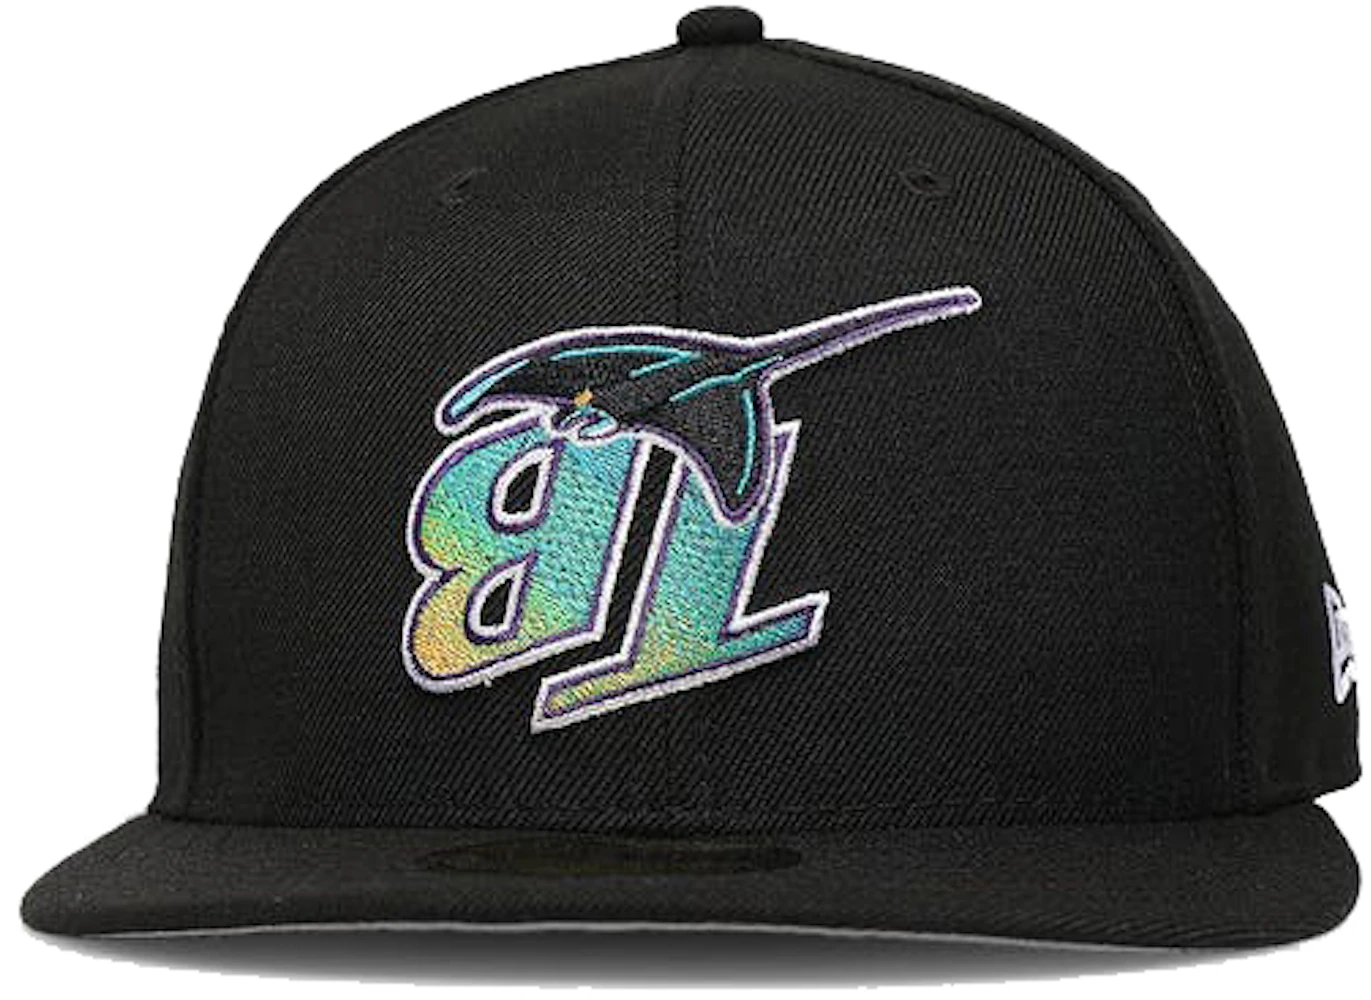 New Era Tampa Bay Rays Upside Down 59FIFTY Fitted Hat Black